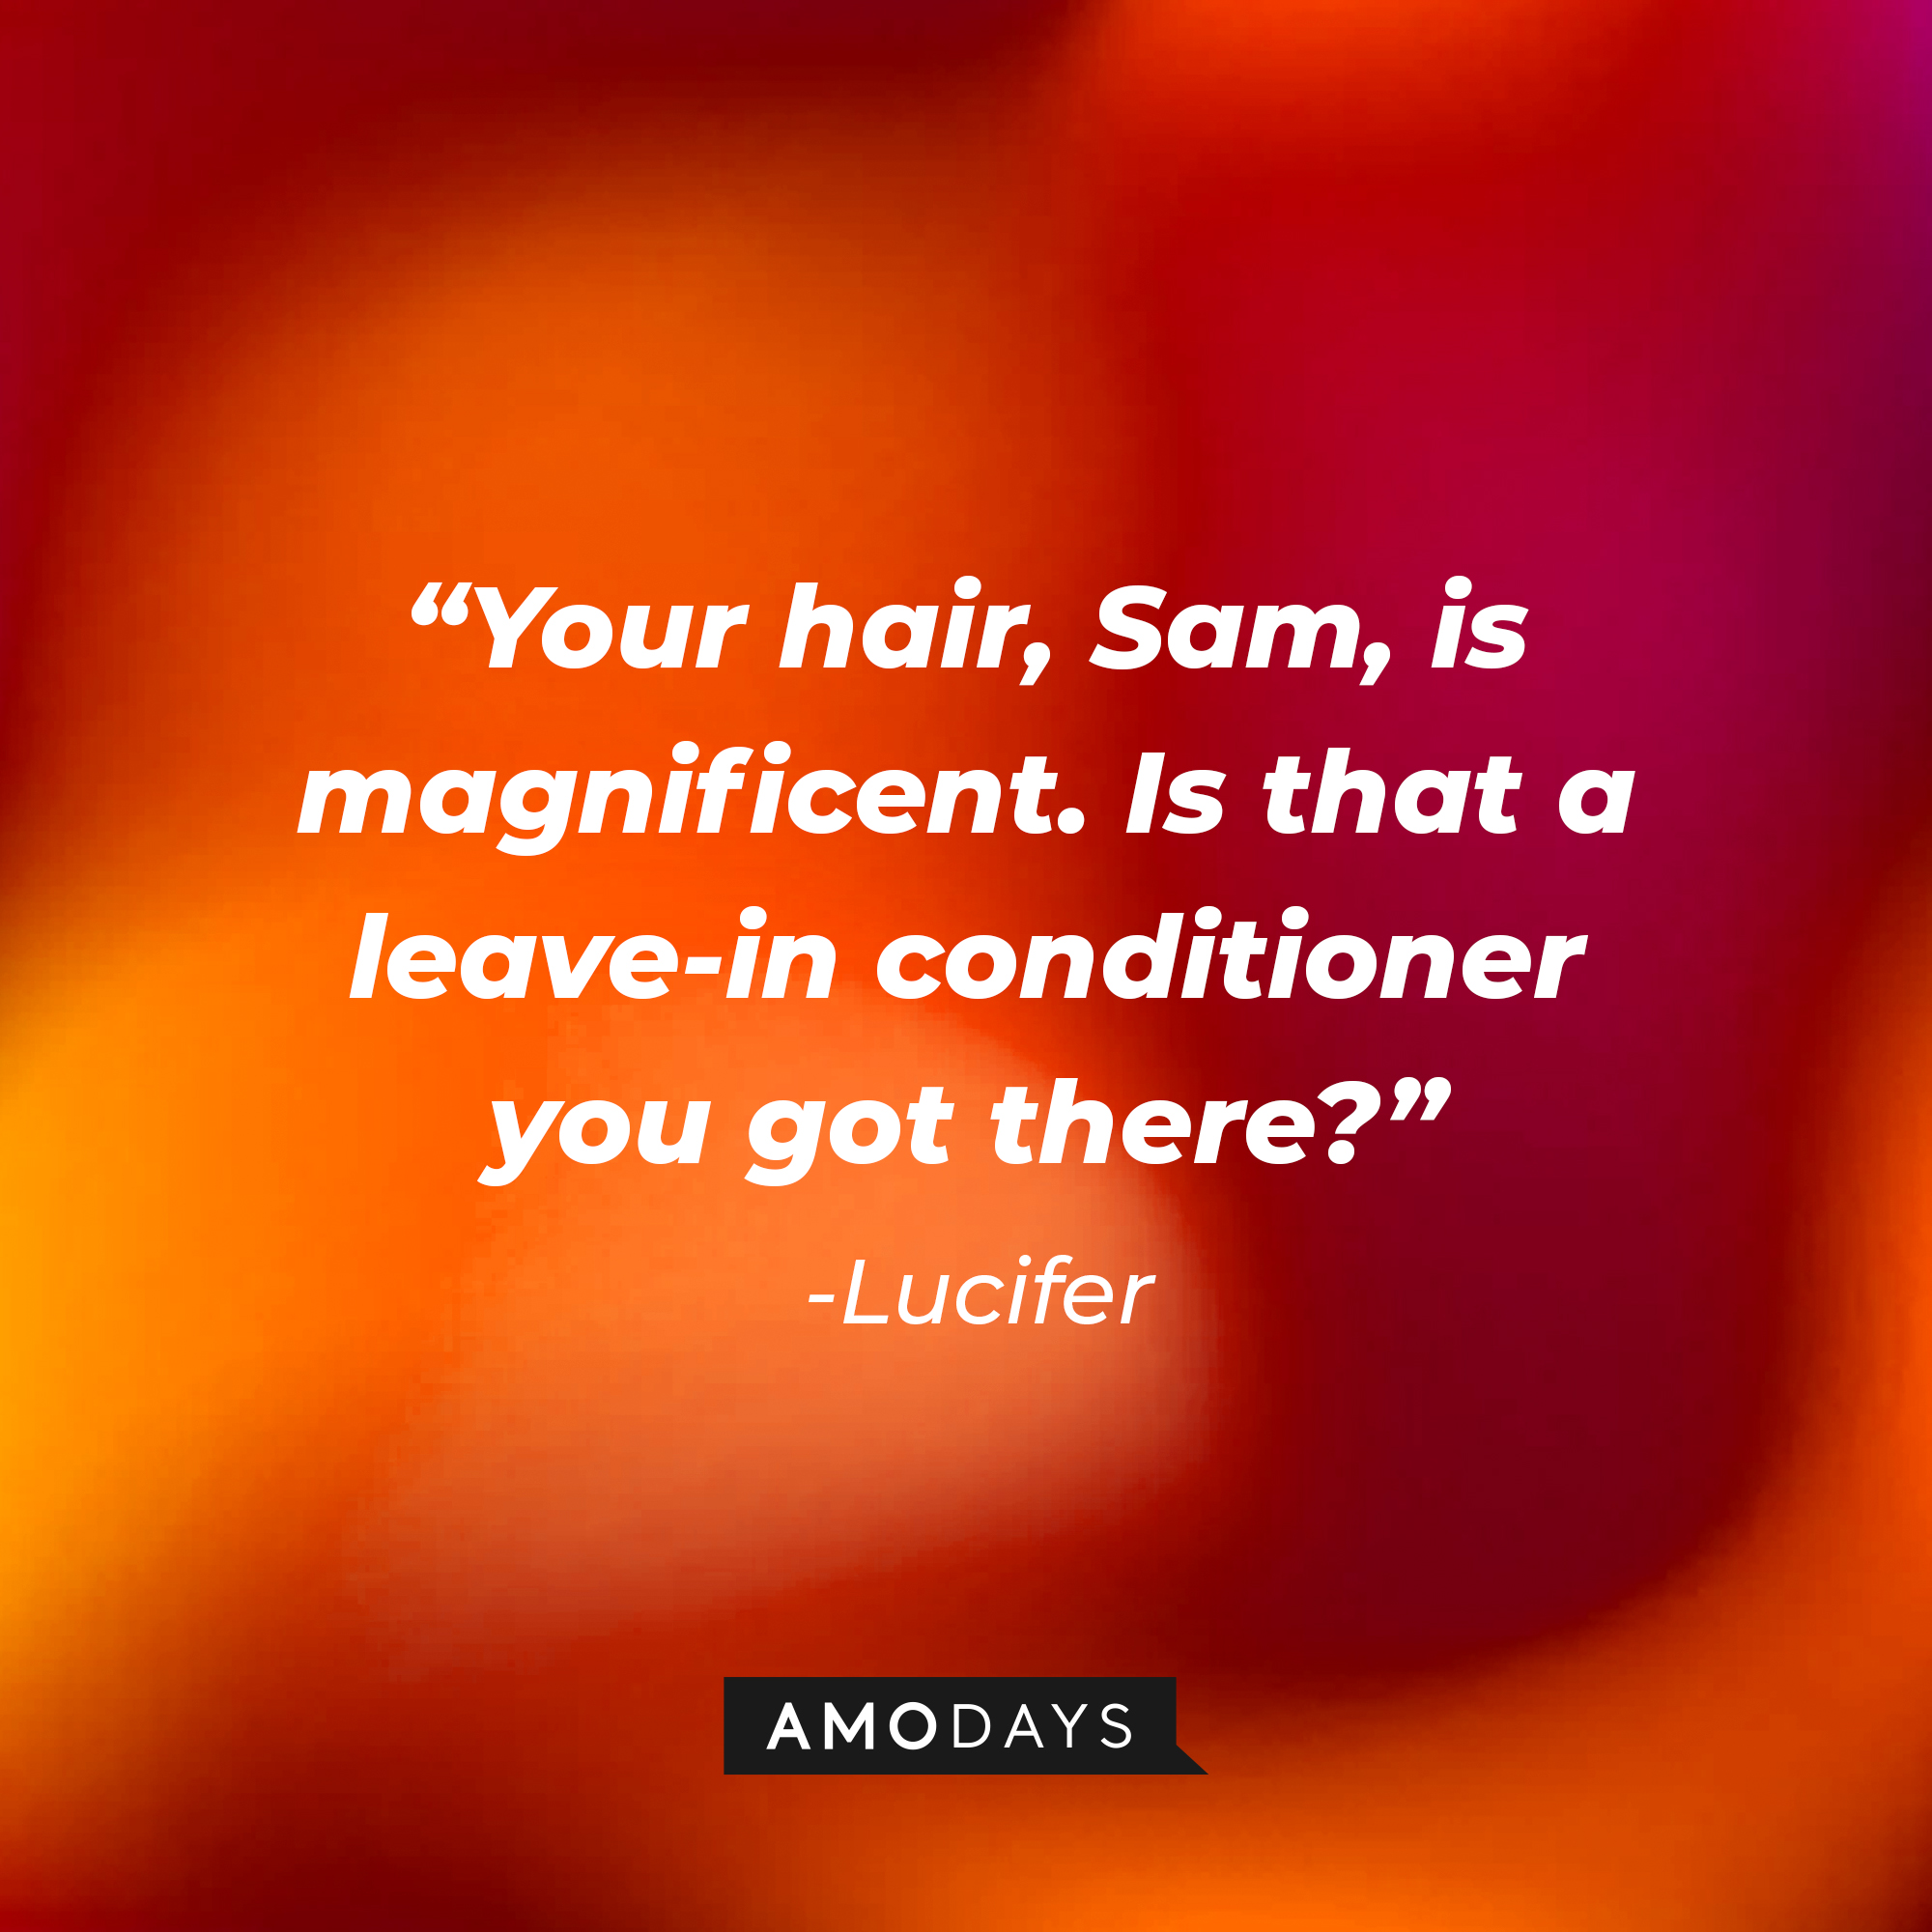 Lucifer’s quote: "Your hair, Sam, is magnificent. Is that a leave-in conditioner you got there?" | Source: AmoDays